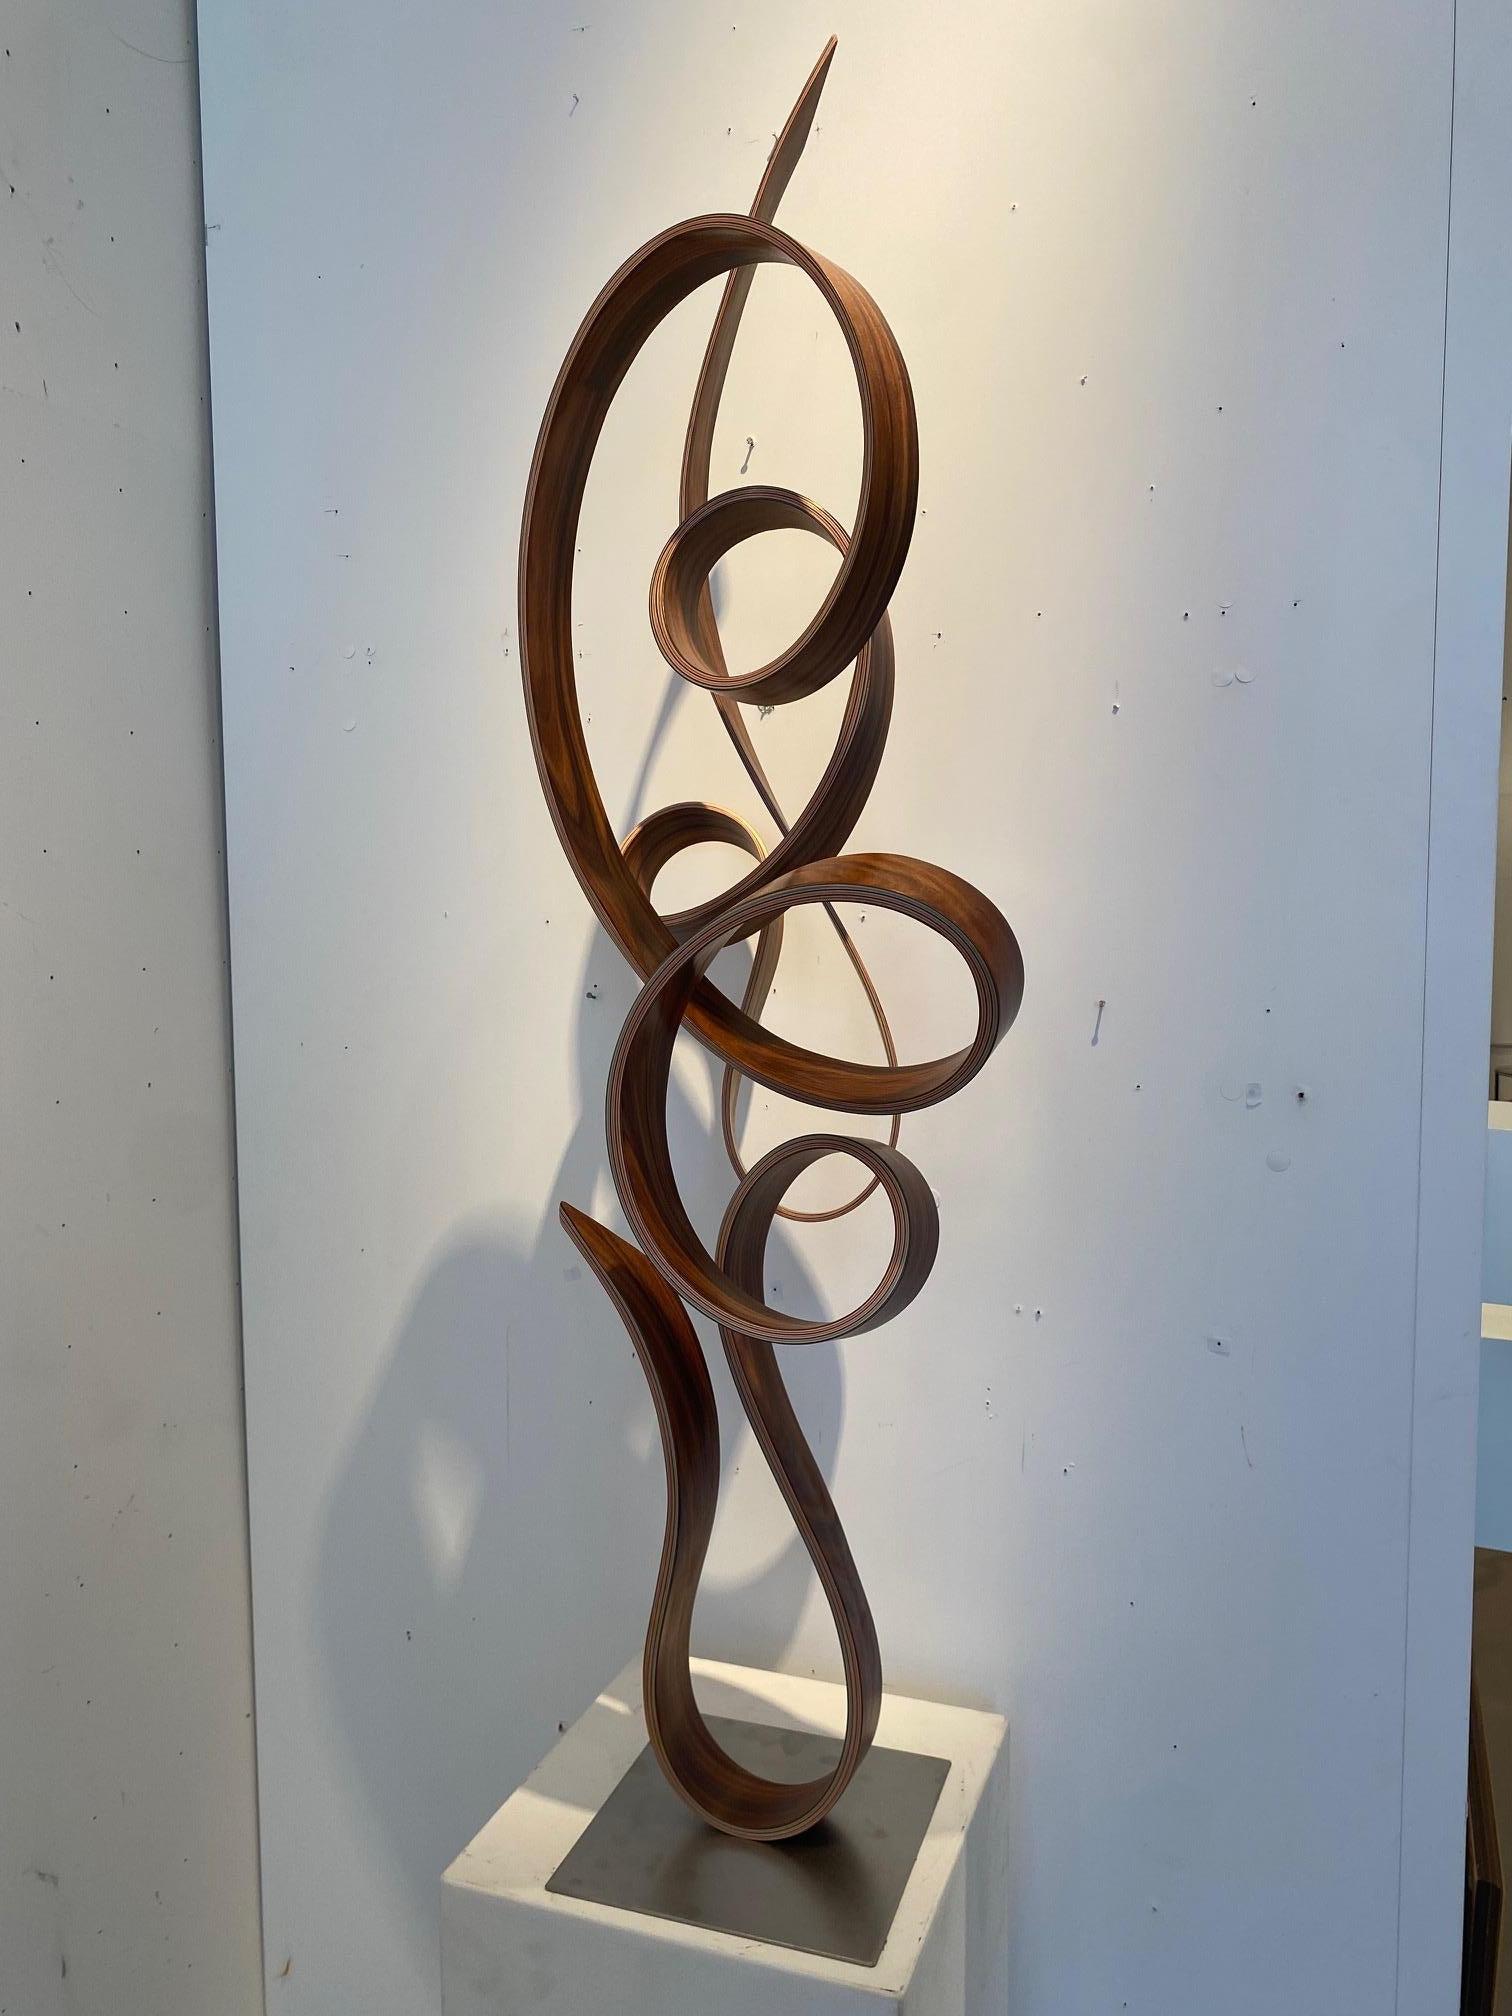 MWT-curvilinear minimalist maple wood sculpture defying gravity by Jacinto Moros 7